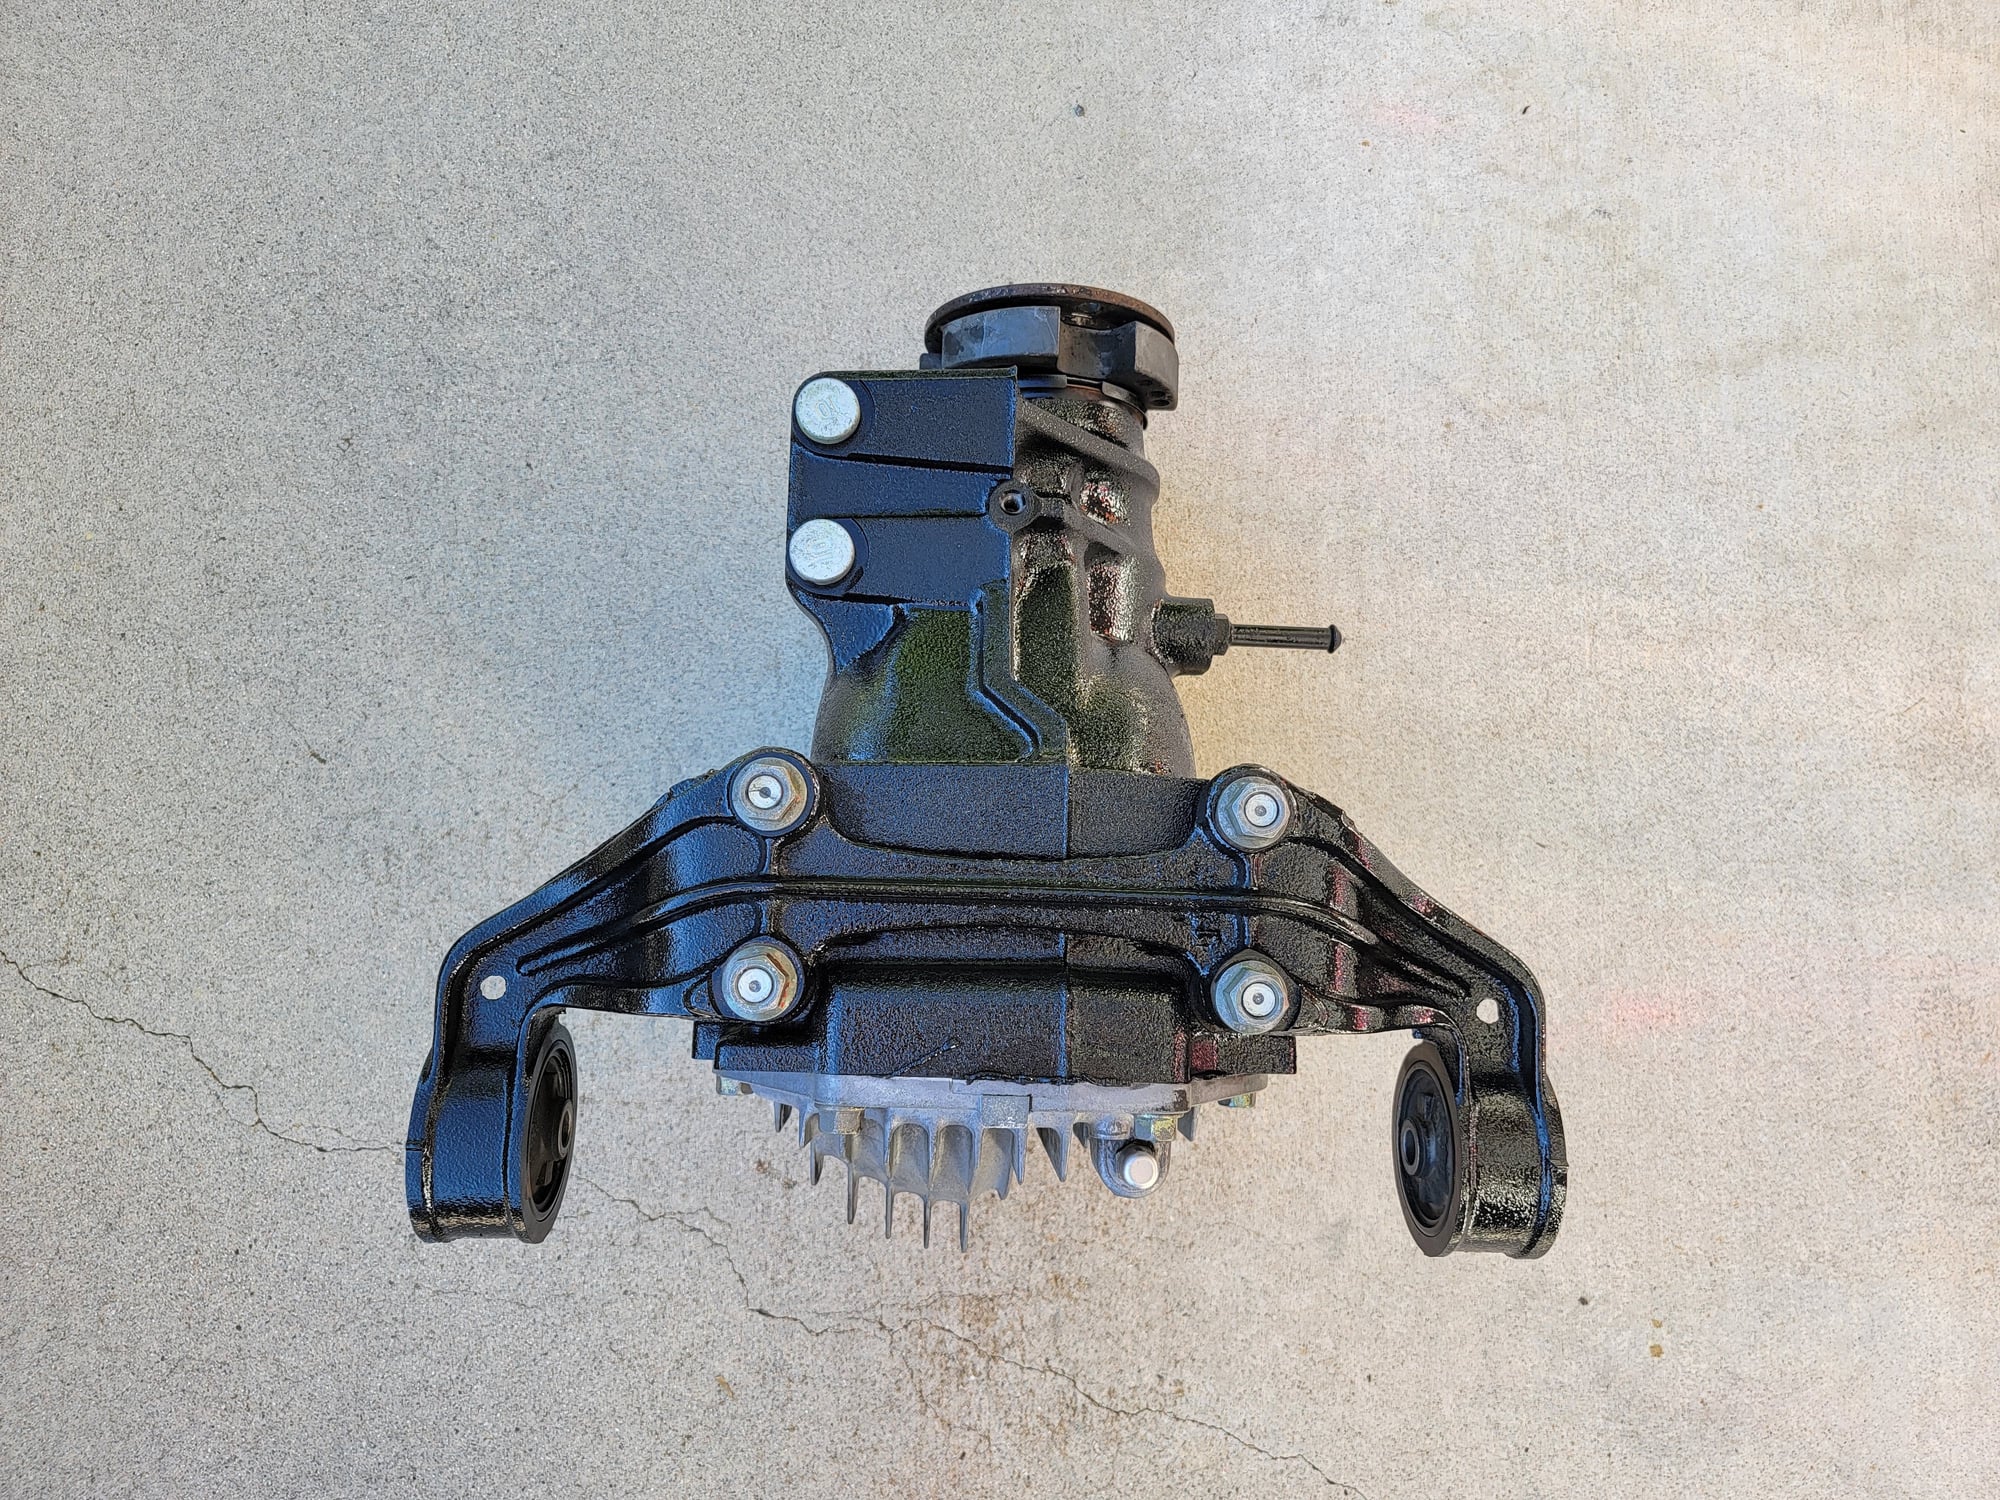 Drivetrain - FD - Rear Differential (Torsen LSD & 4.10 final drive) - Used - 1993 to 2002 Mazda RX-7 - San Clemente, CA 92673, United States